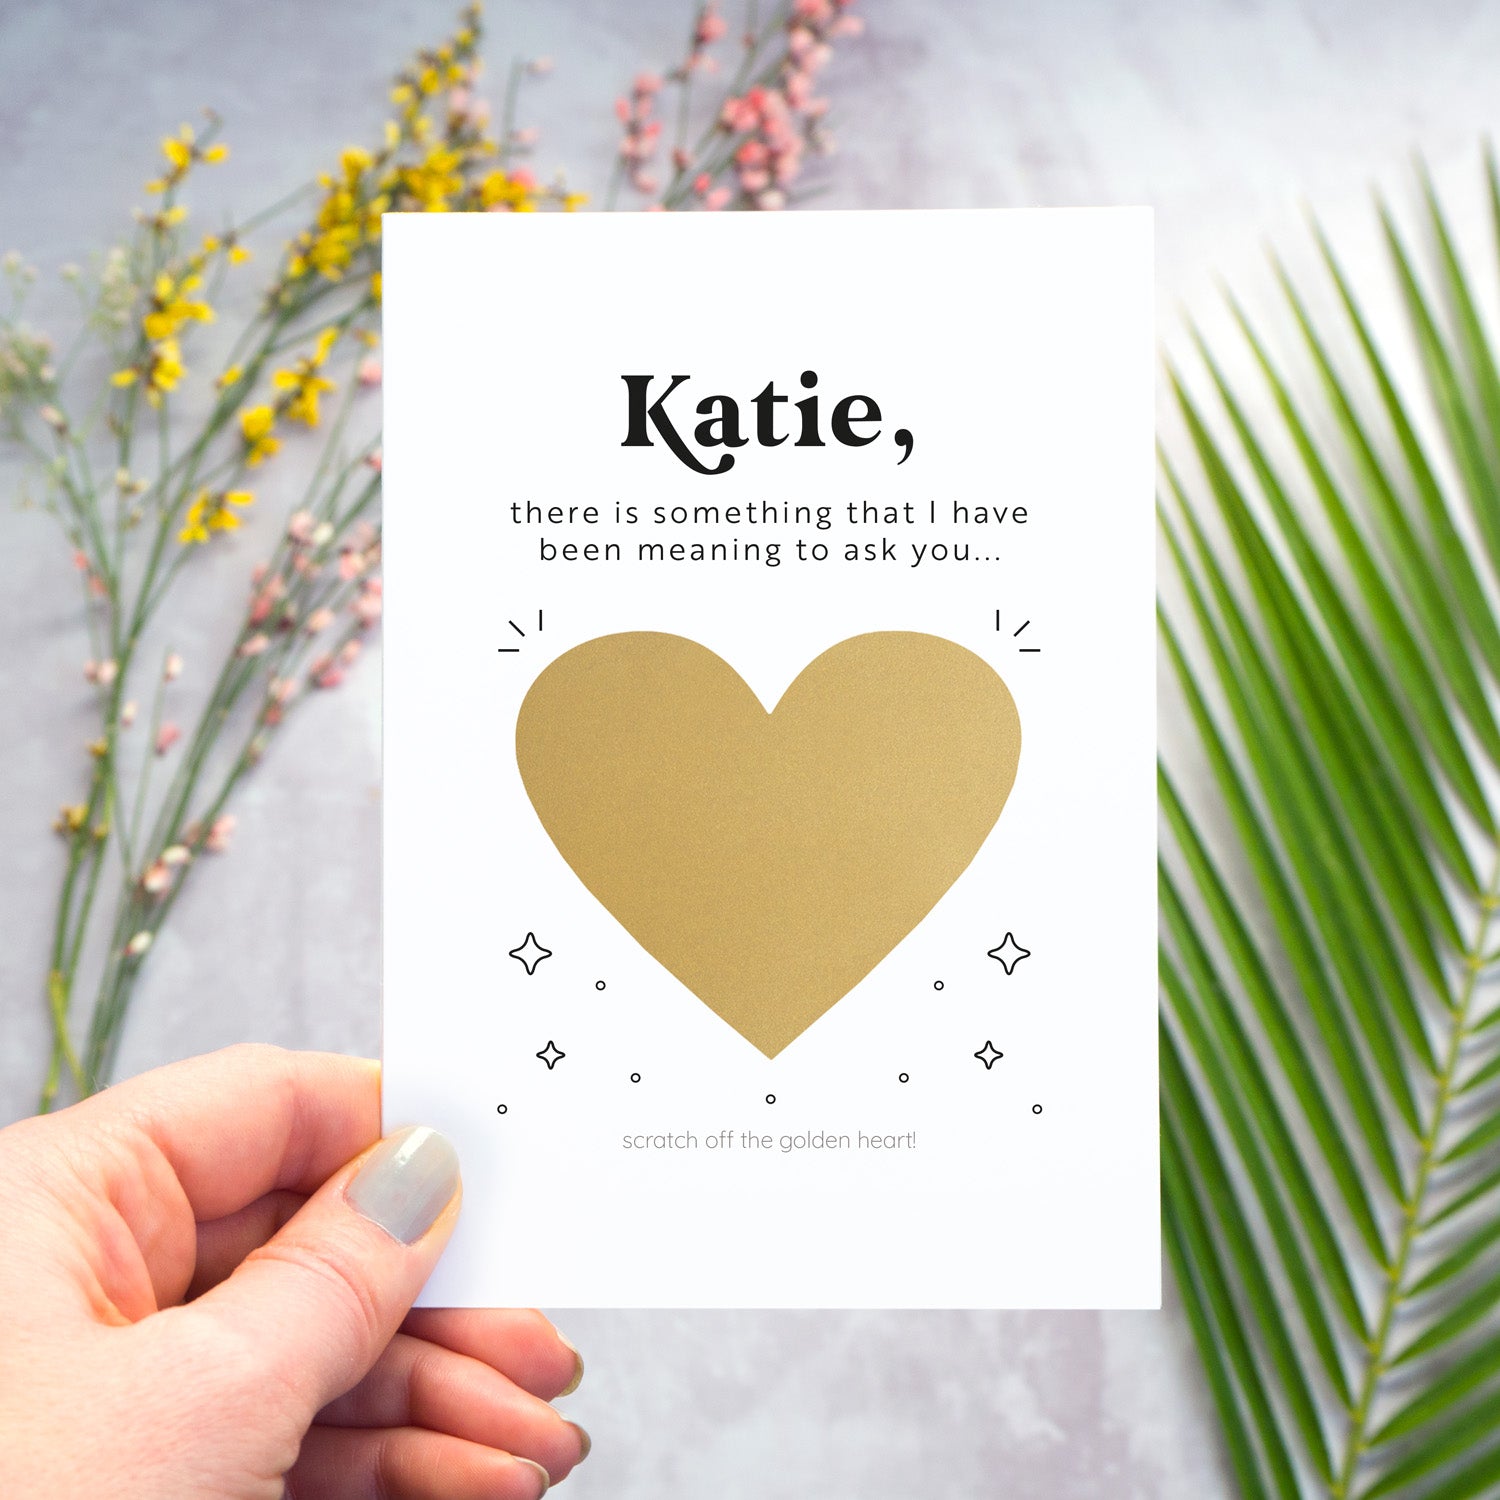 This image shows how the personalised question scratch card looks before the recipient scratches away the heart. In this image the card is being held over a grey surface which has a variety of colour flowers and foliage in the background. The heart has not yet been scratched away.